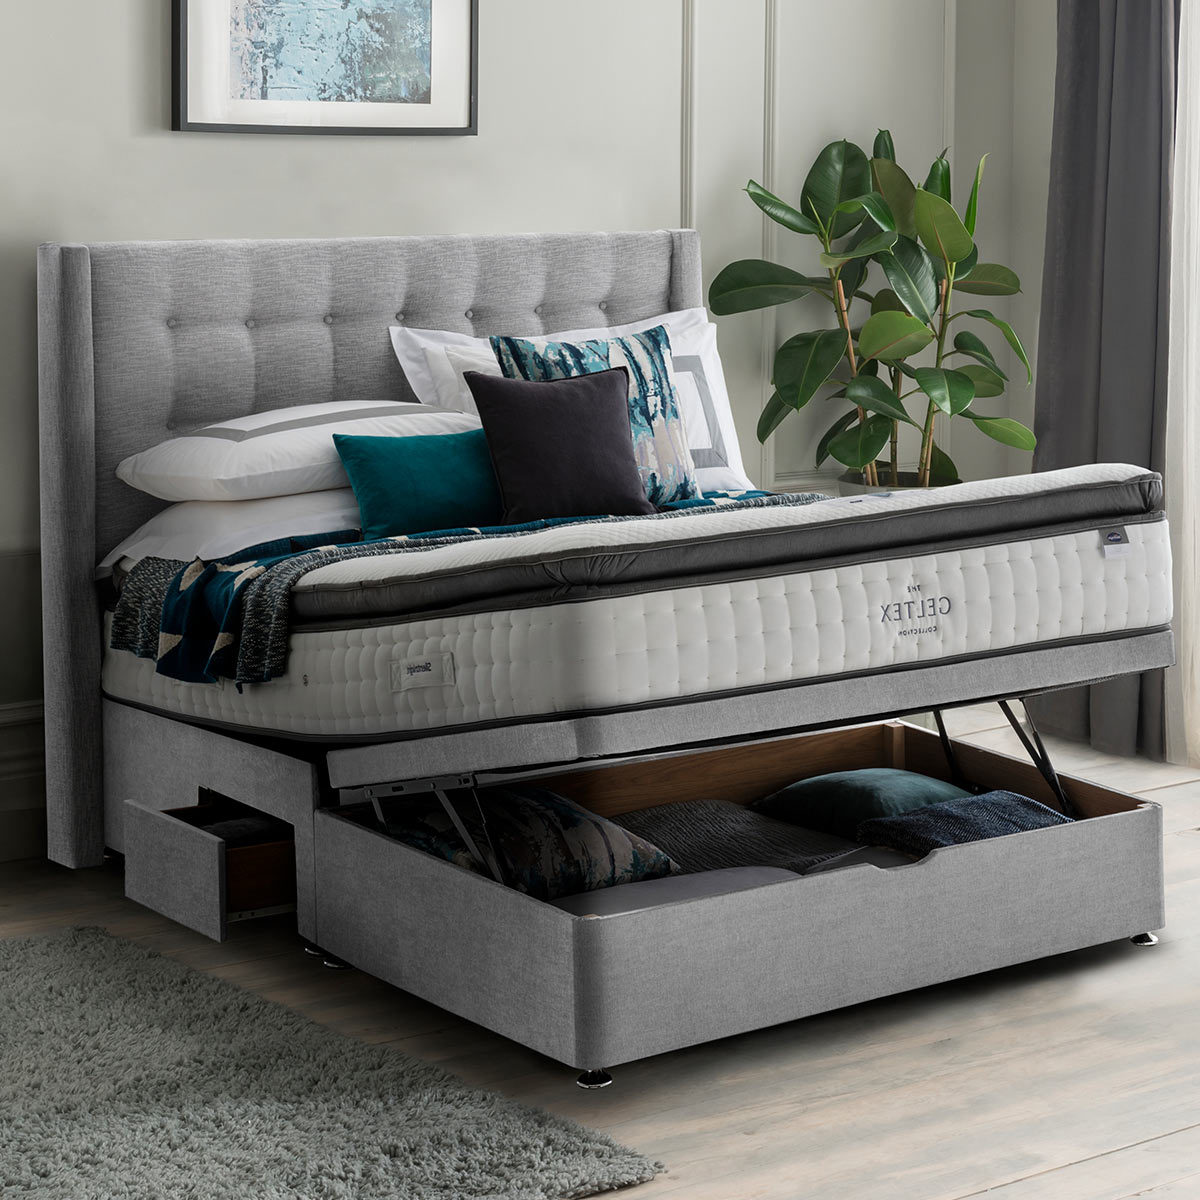 Silentnight Ottoman Divan Base With, Ultimate Storage Bed King Size